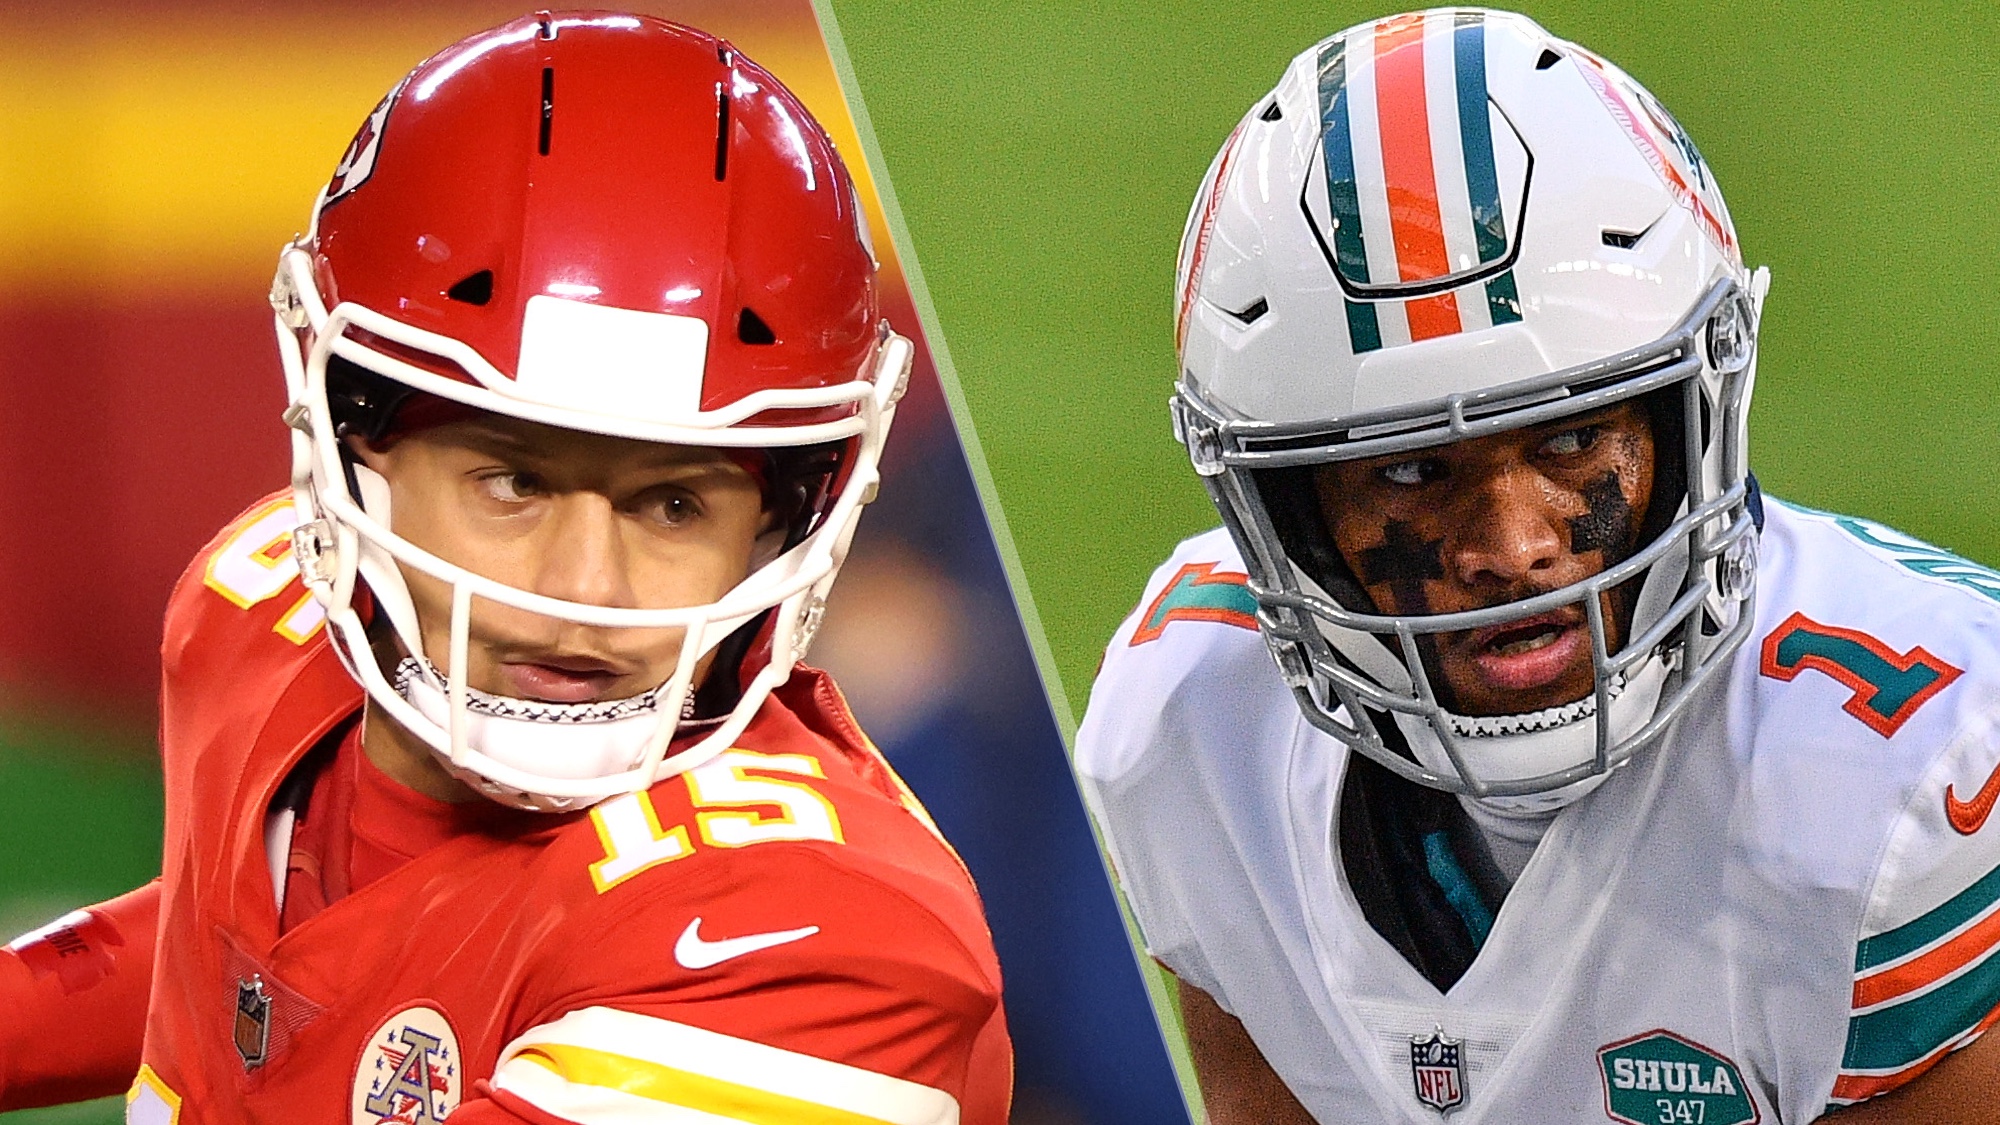 Chiefs Vs Dolphins / F1mfjafu292h M Watch video highlights of the